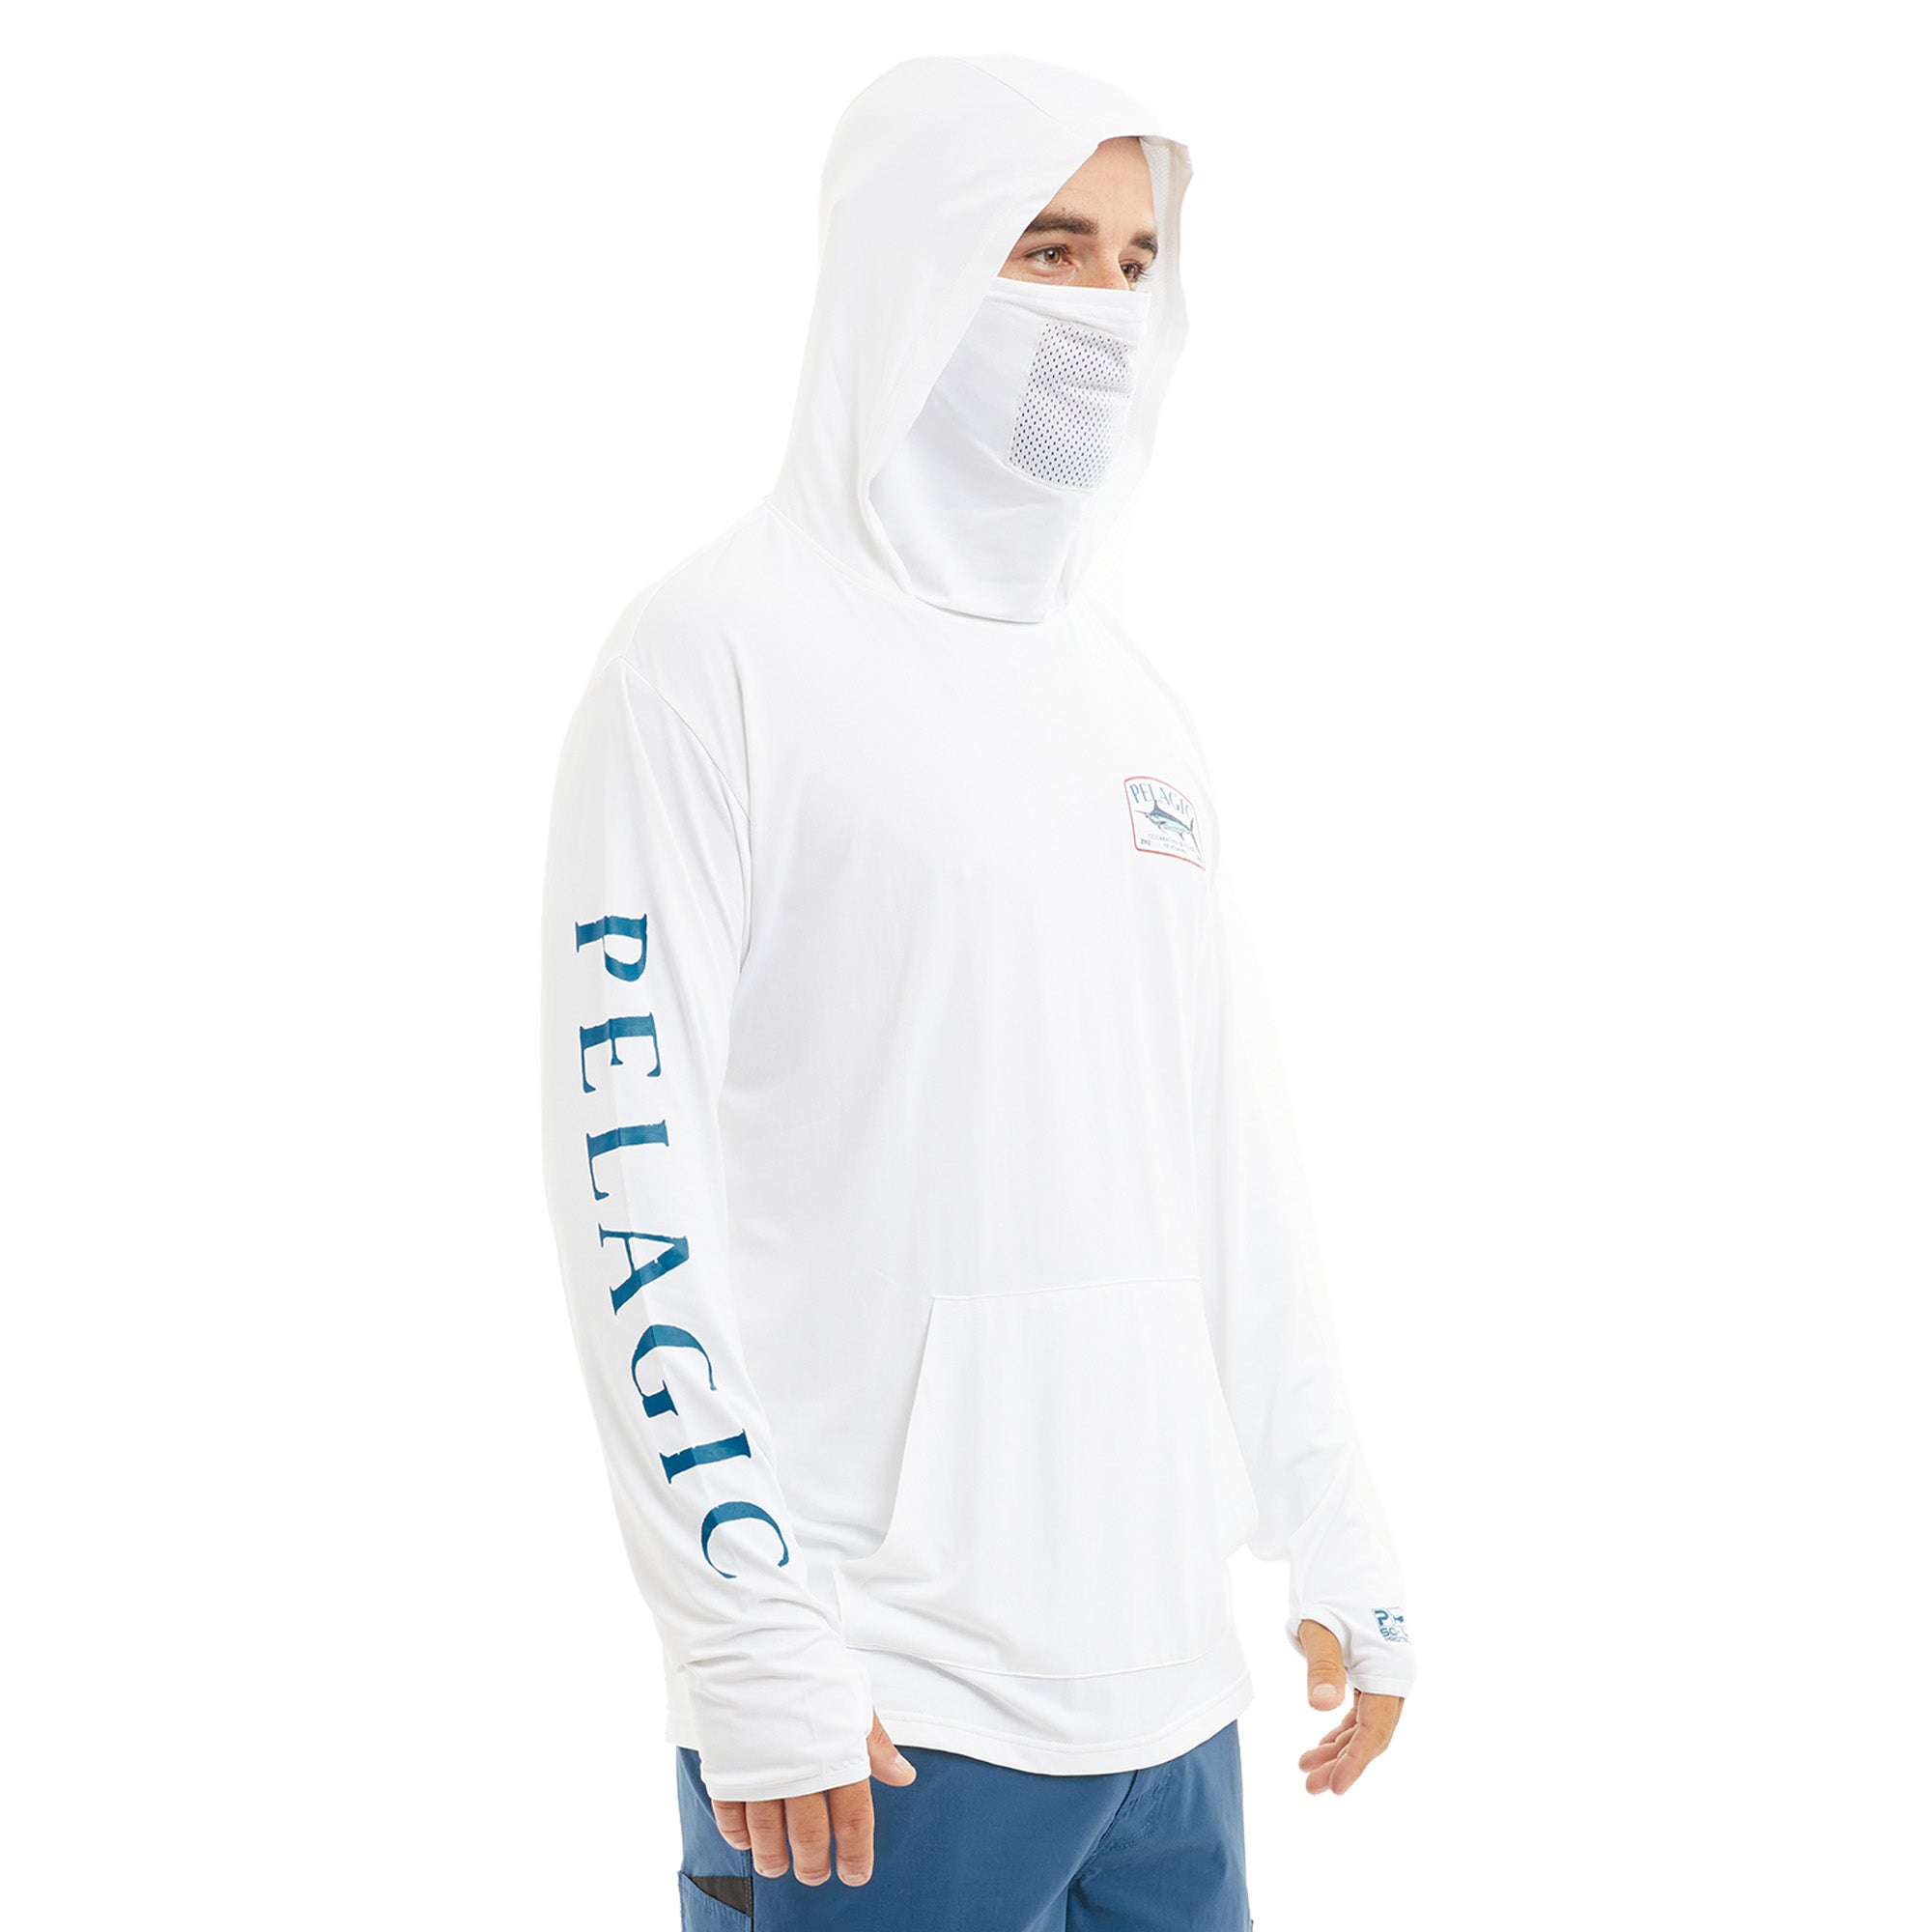 Pelagic Grea Fishing Shirts, Long Sleeve, Hooded Face Cover, Quick Dry, UV Protection, Fishing Face